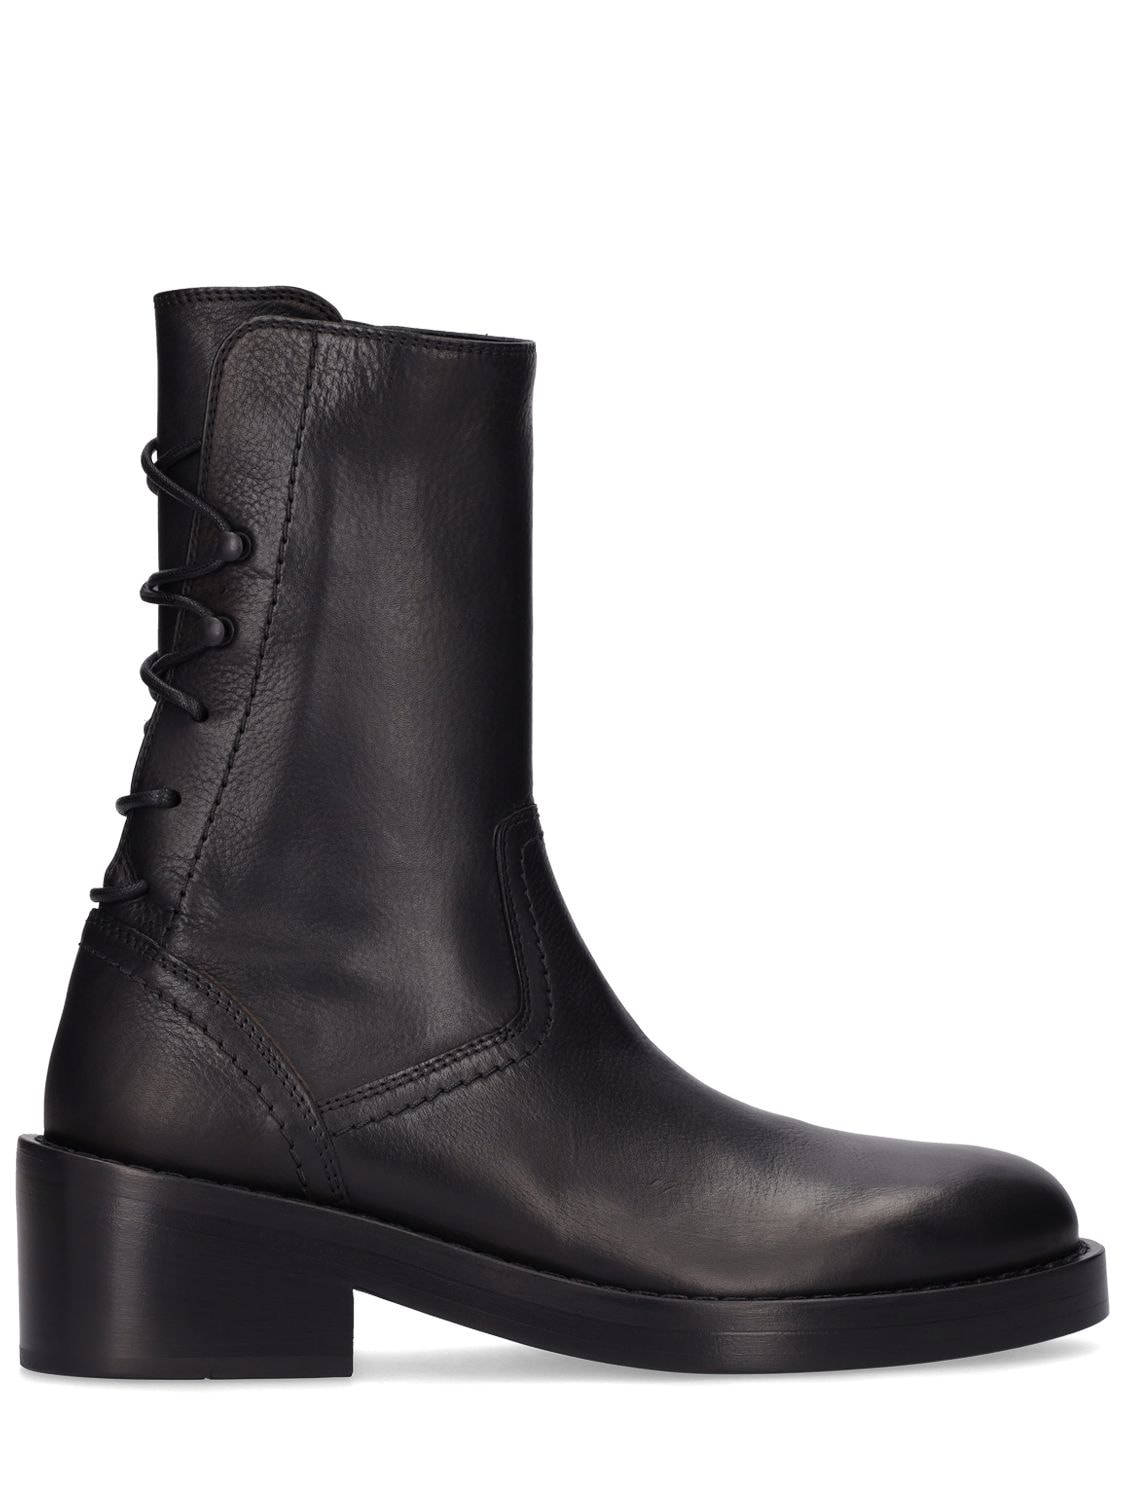 ANN DEMEULEMEESTER 60MM HENRICA LEATHER ANKLE BOOTS